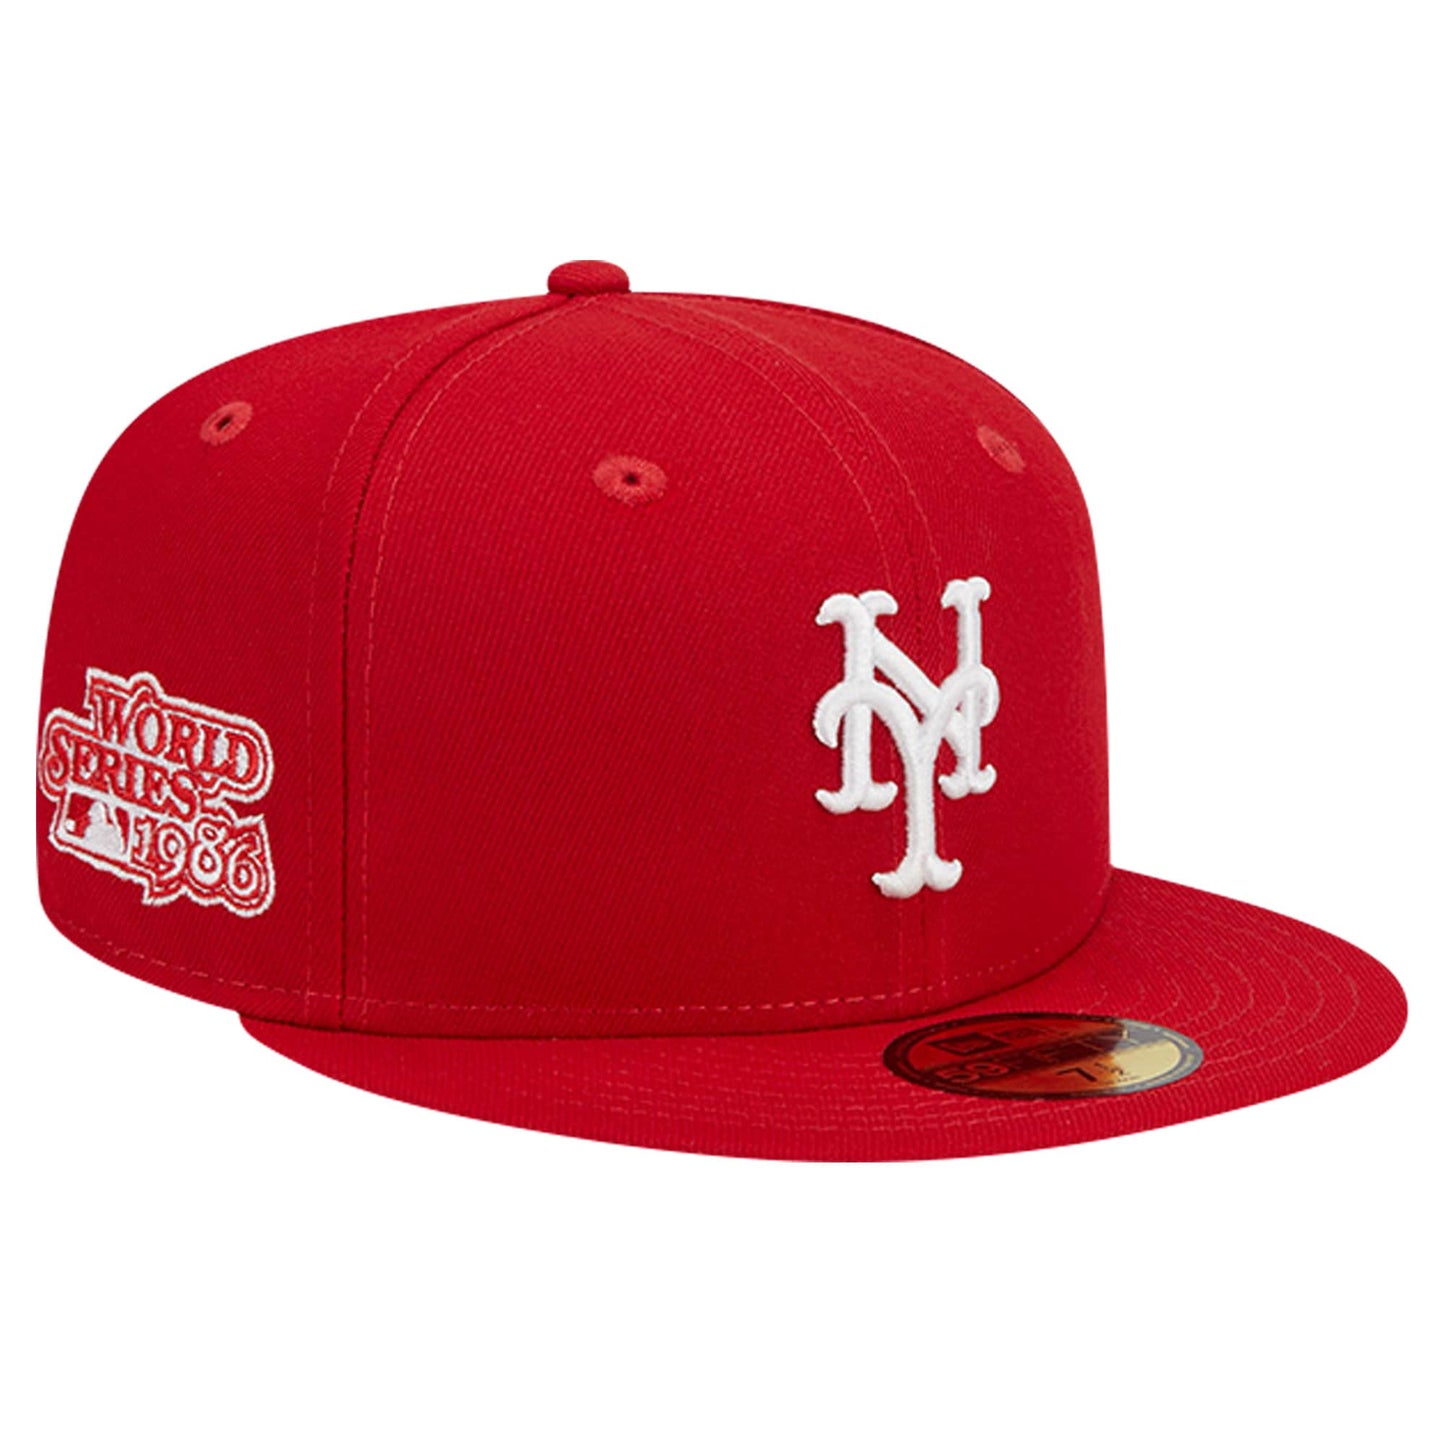 New Era 59FIFTY New York Mets Sidepatch